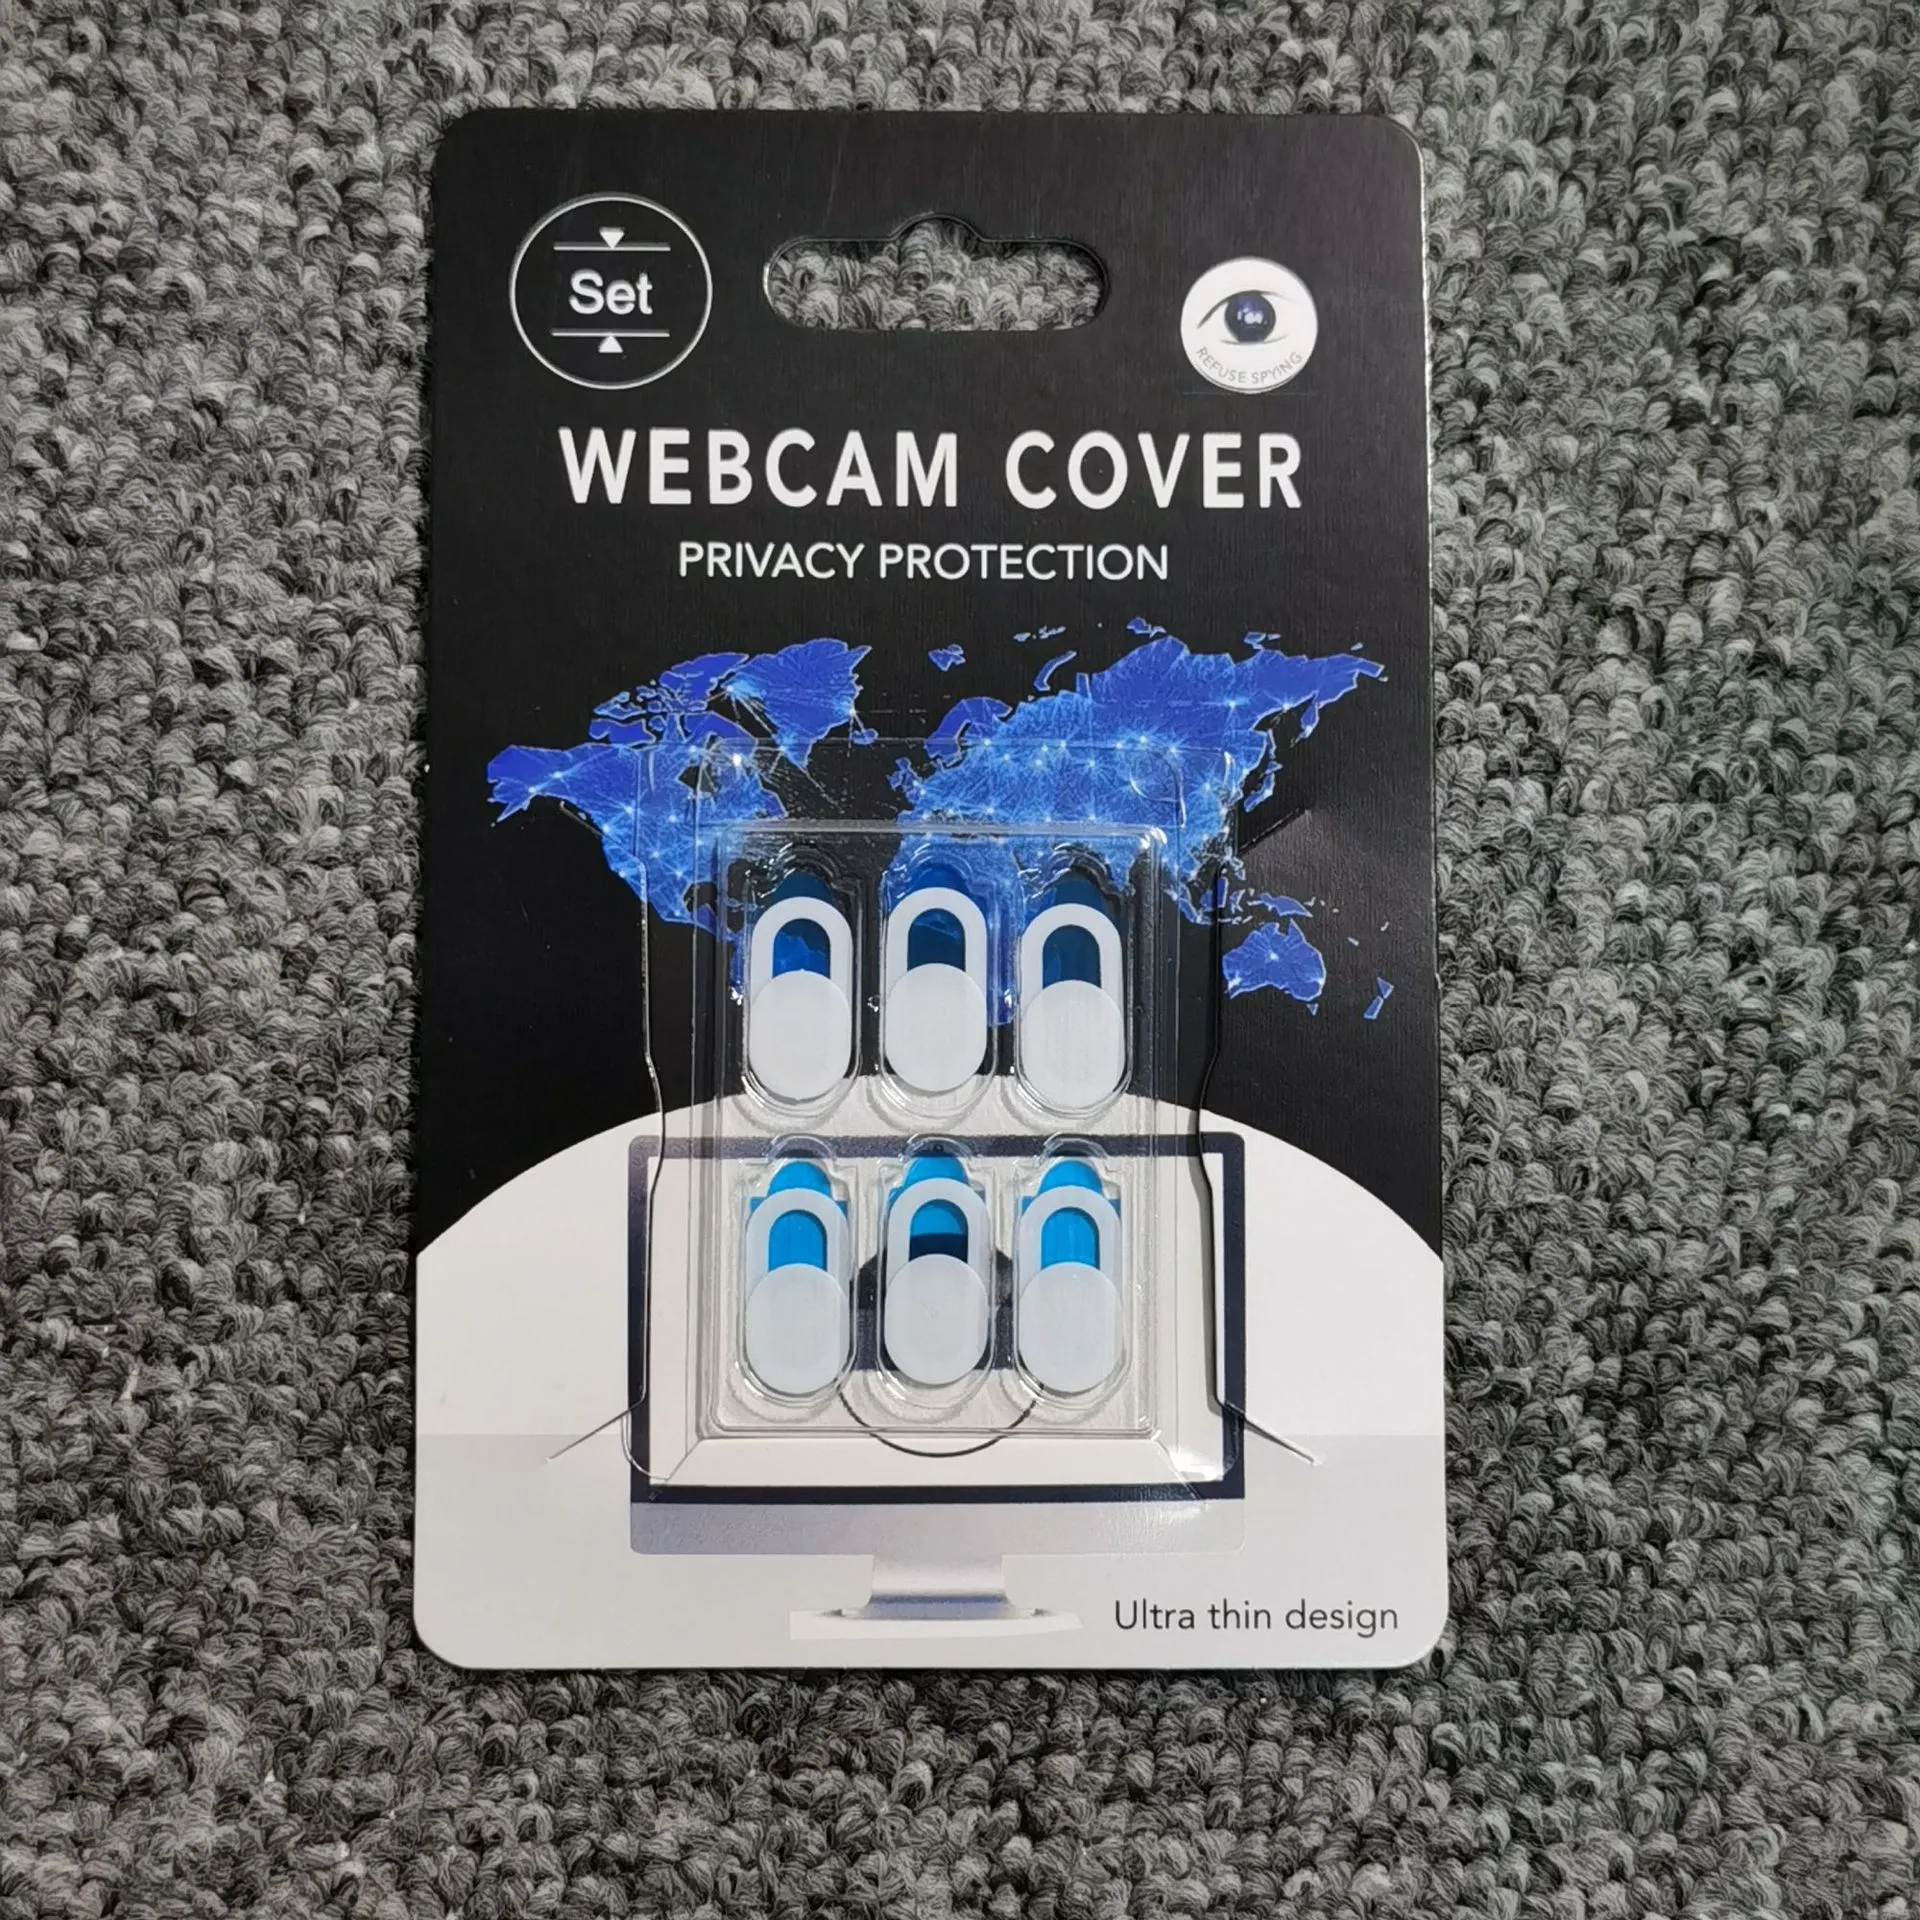 2021 NEWEST Webcam Cover Privacy Protective Cover Universal WebCam Cover Shutter Magnet Tablet PC Camera